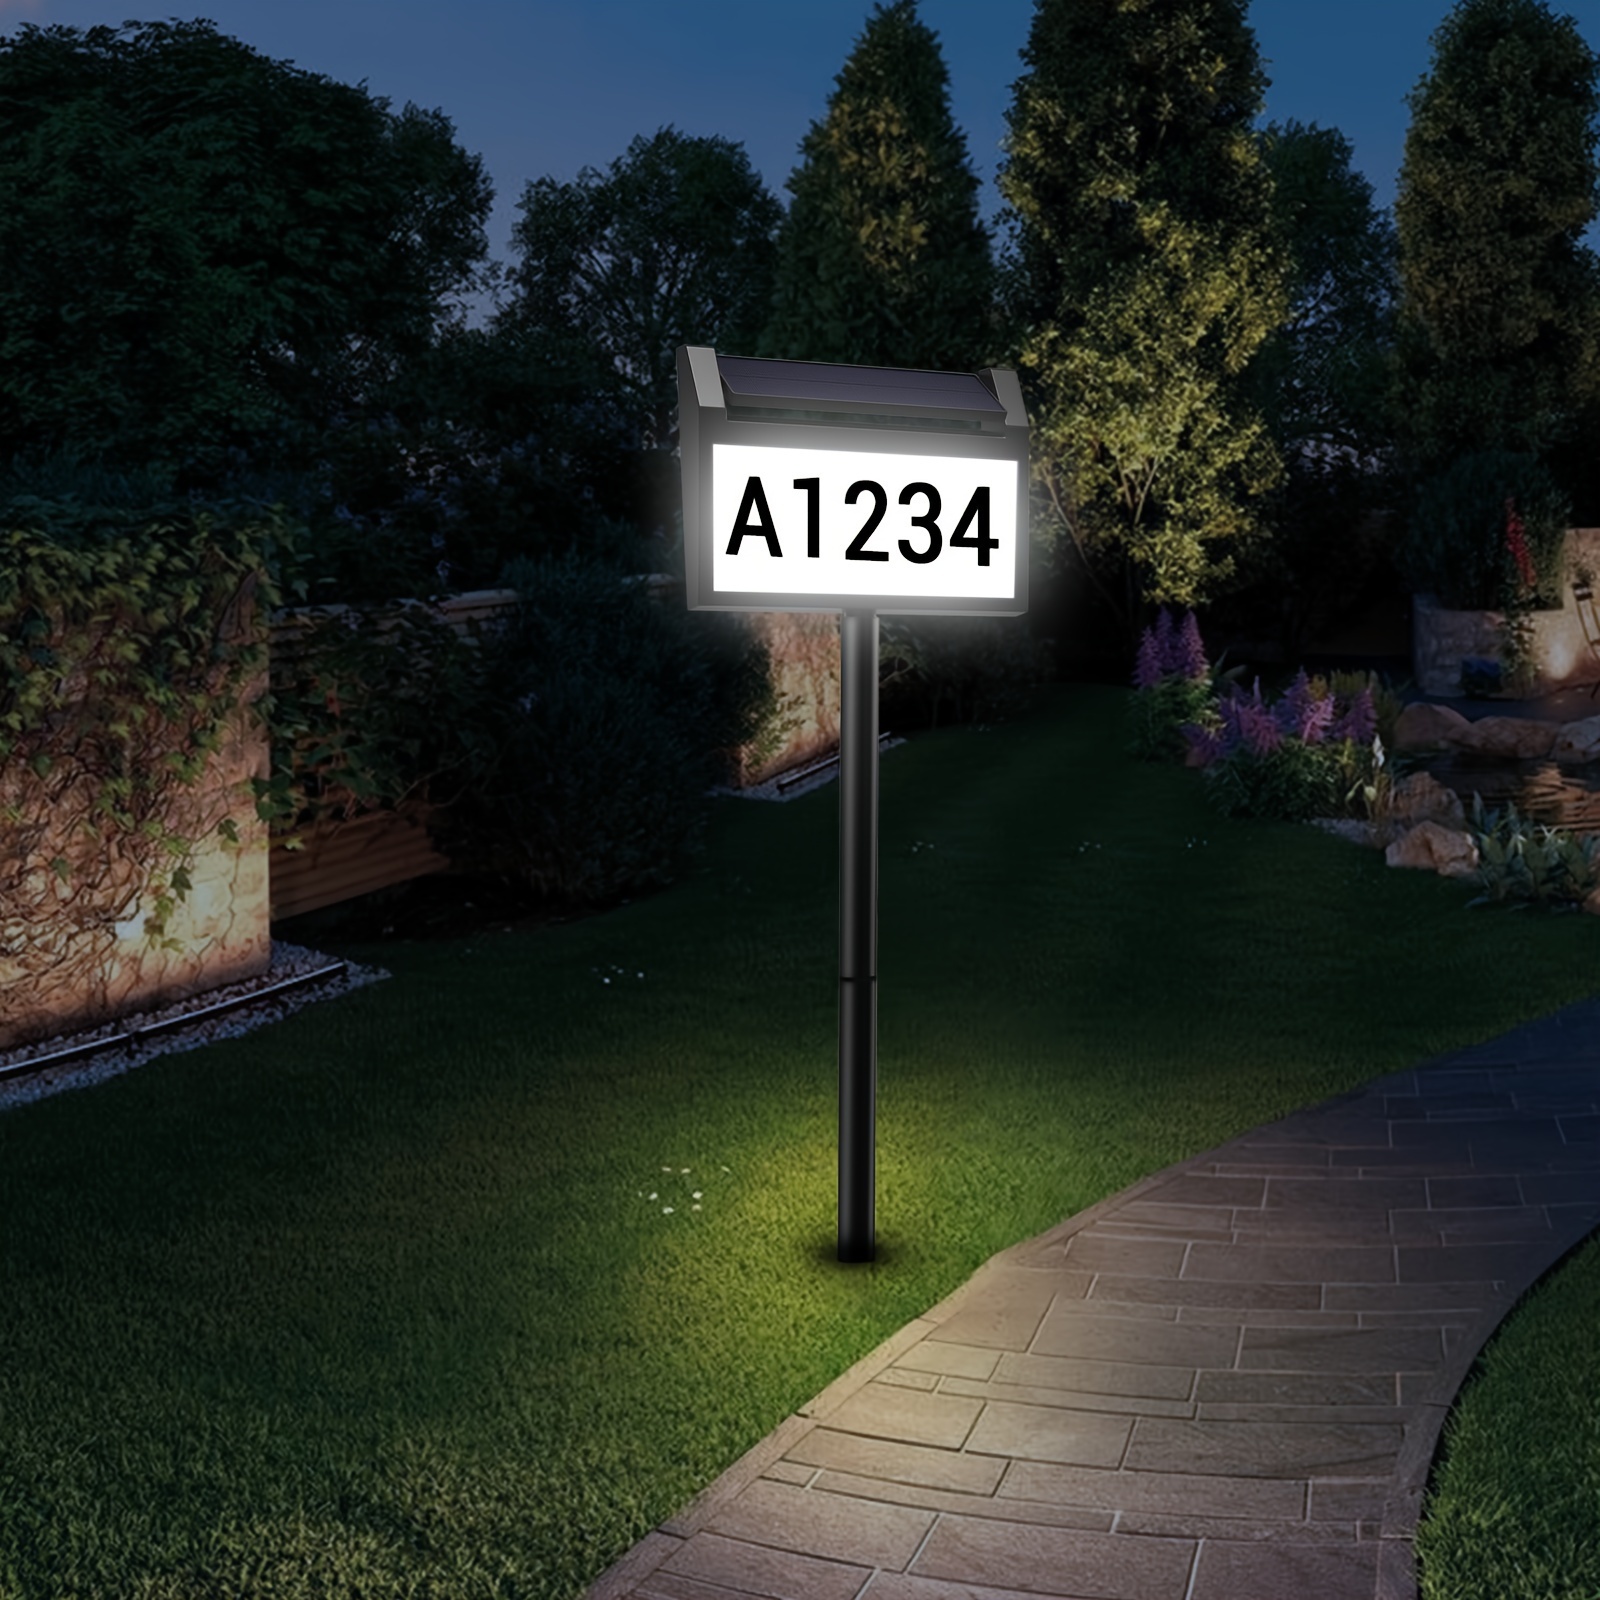 

Solar House Number Sign, Led Illuminated Outdoor Address Plaque With Smart Control, 3-color In 1 Waterproof Solar Powered House Number Light With Stakes For Outside Home, Yard, Street, House